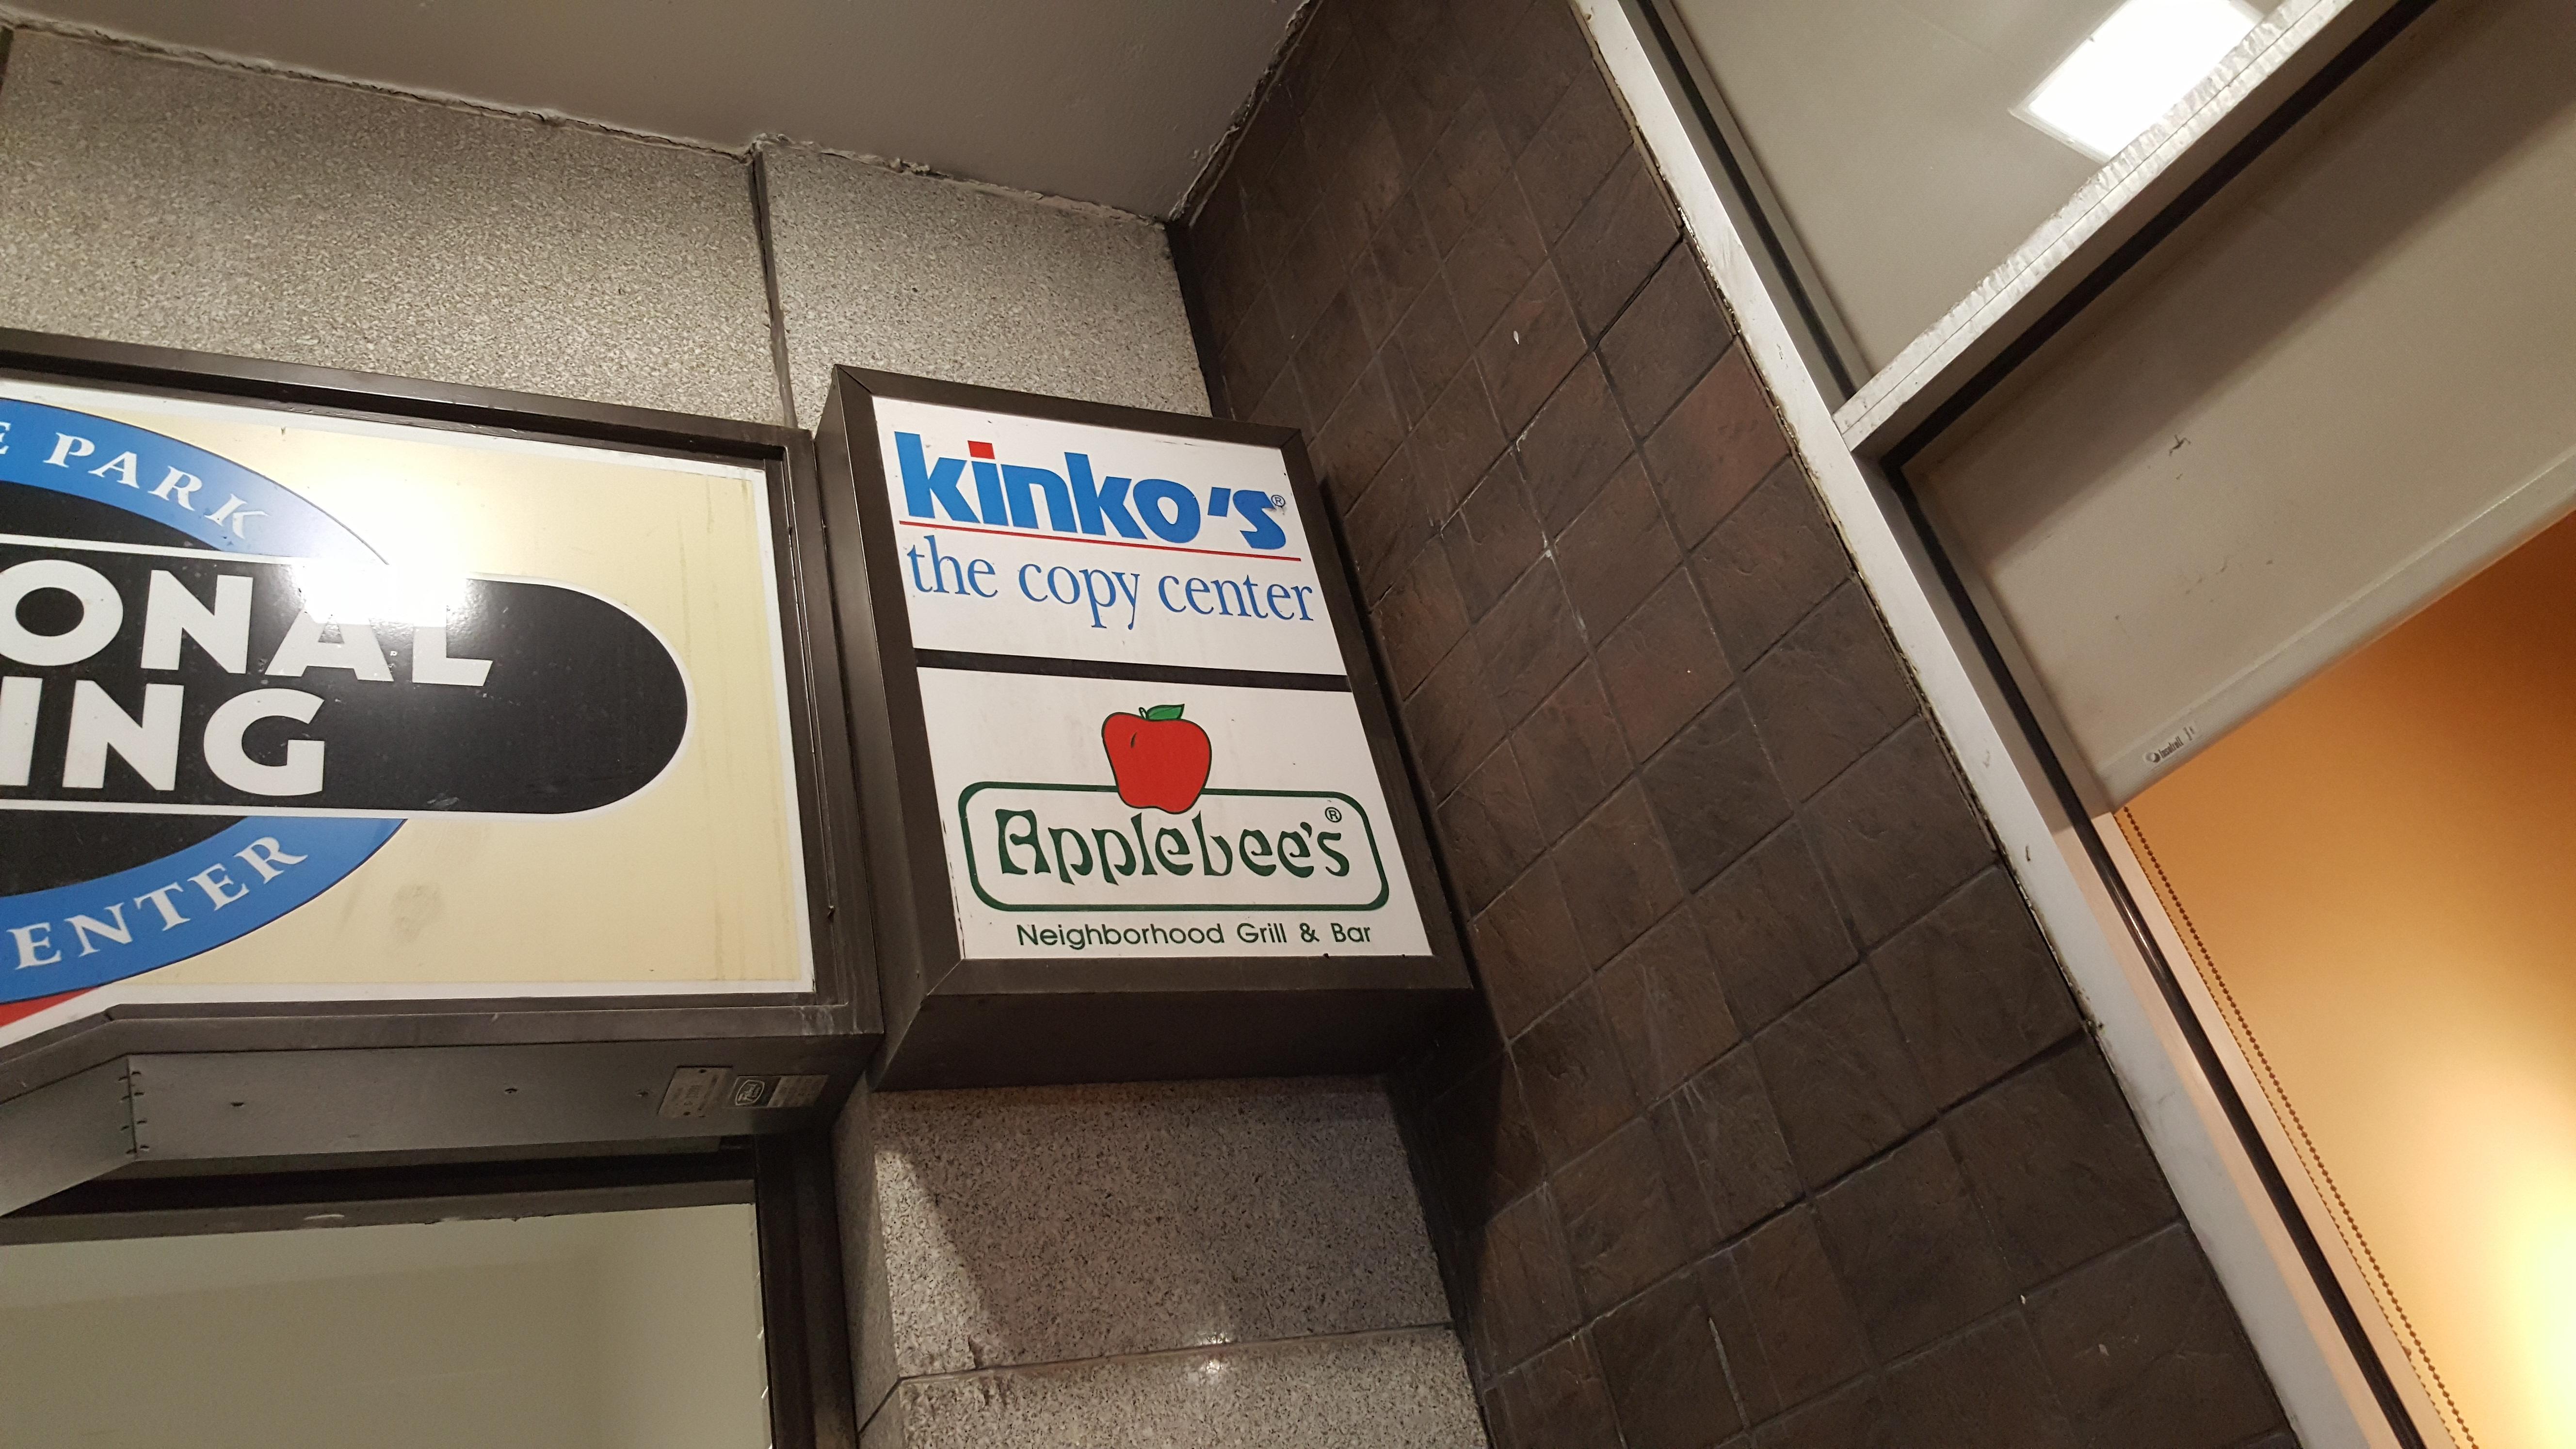 Kinko S Logo - How Old Do You Think This Pre FedEx Sign For Kinko's Is? 5312 X